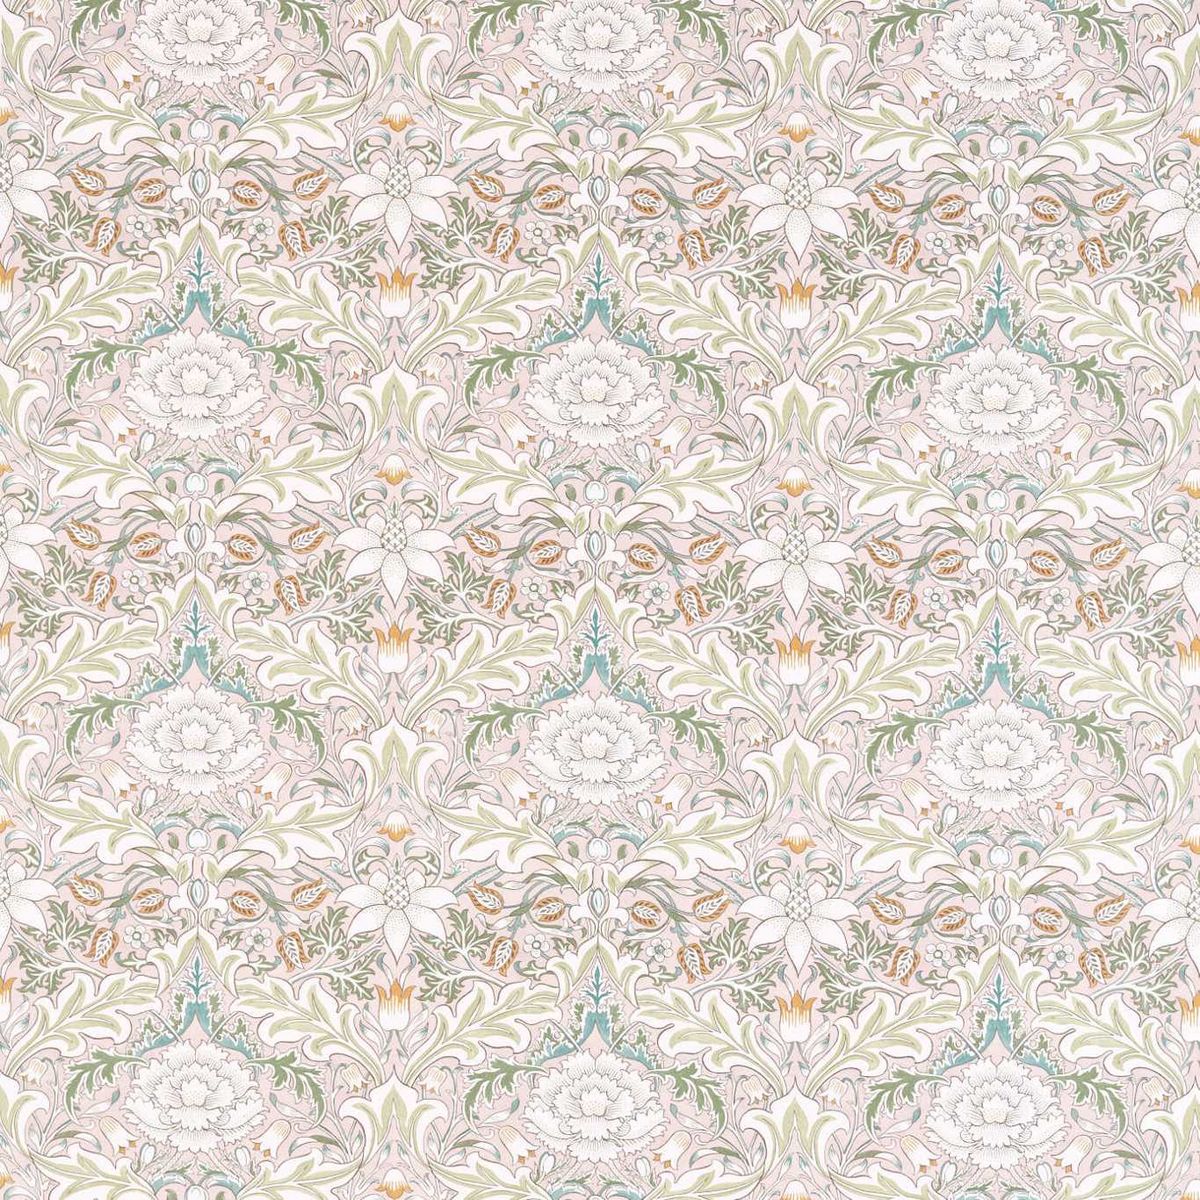 Simply Severn Cochineal/Willow Fabric by William Morris & Co.